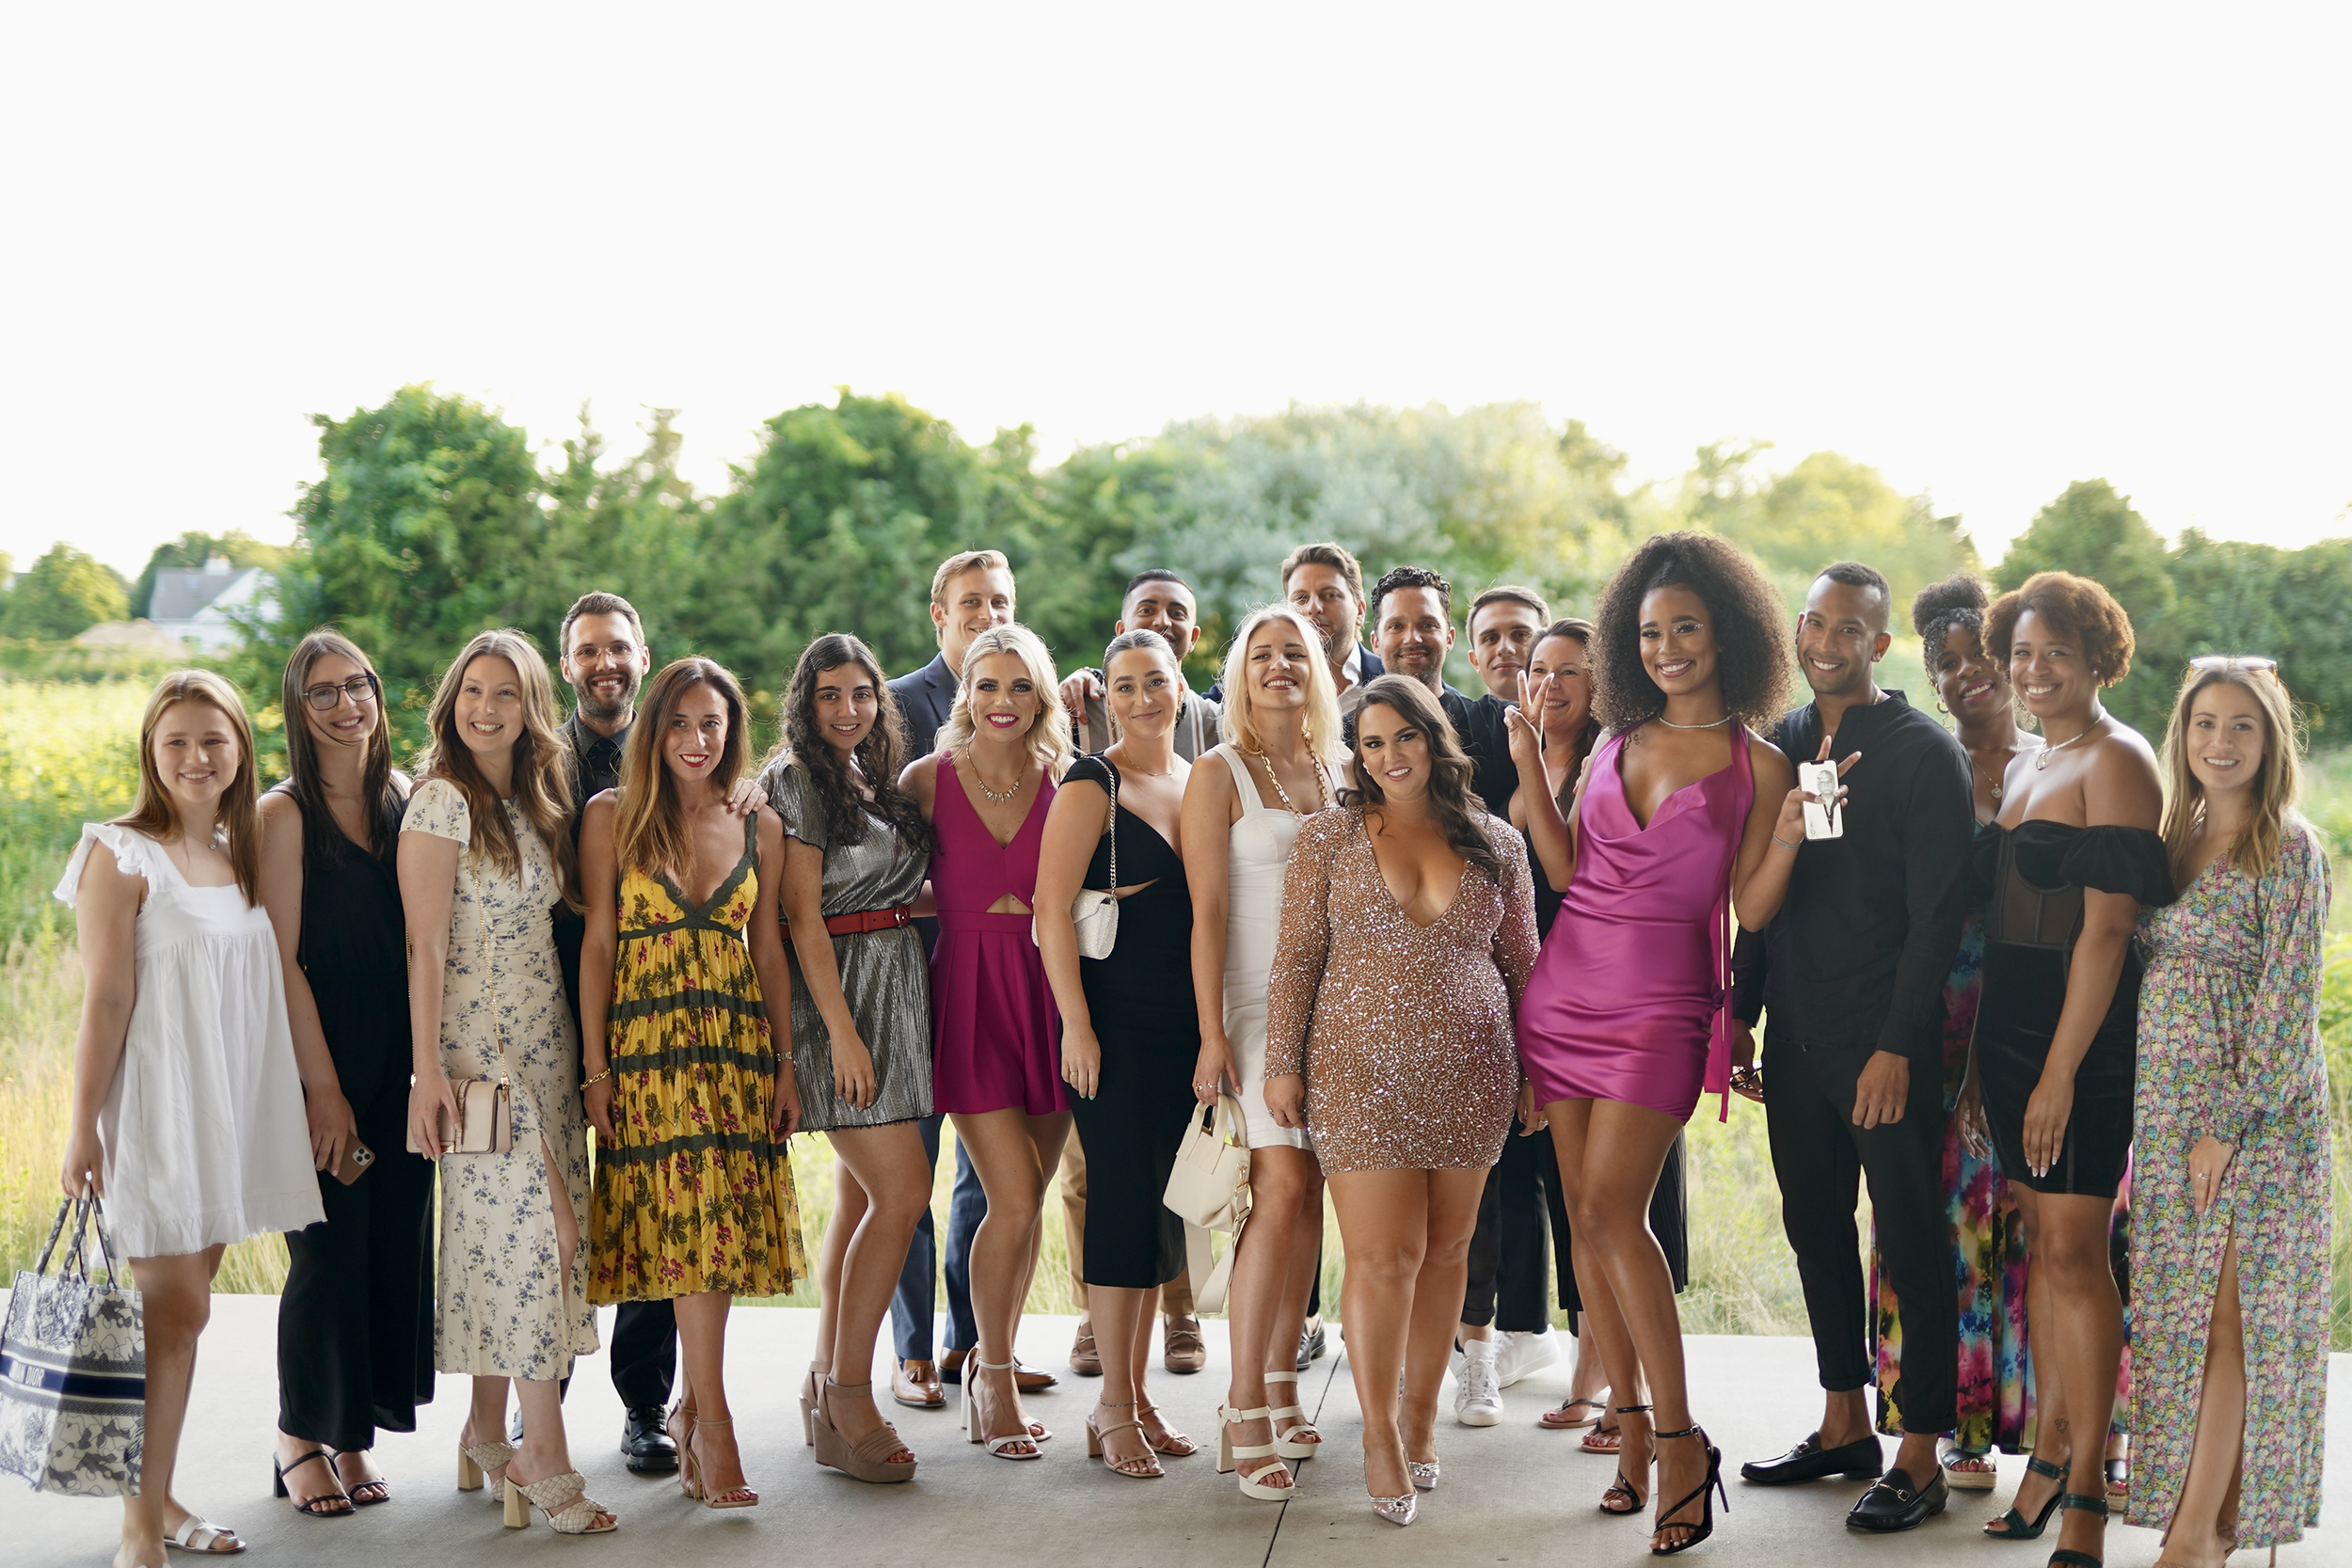  Guests include fellow cast members and colleagues including Mia Calabrese (who was also celebrating her birthday!), J.B. Andreassi, Michael Fulfree, Kenny Arias, Peggy Zabakolas, Justin Mezzatesta and other tastemakers including founder of retail br